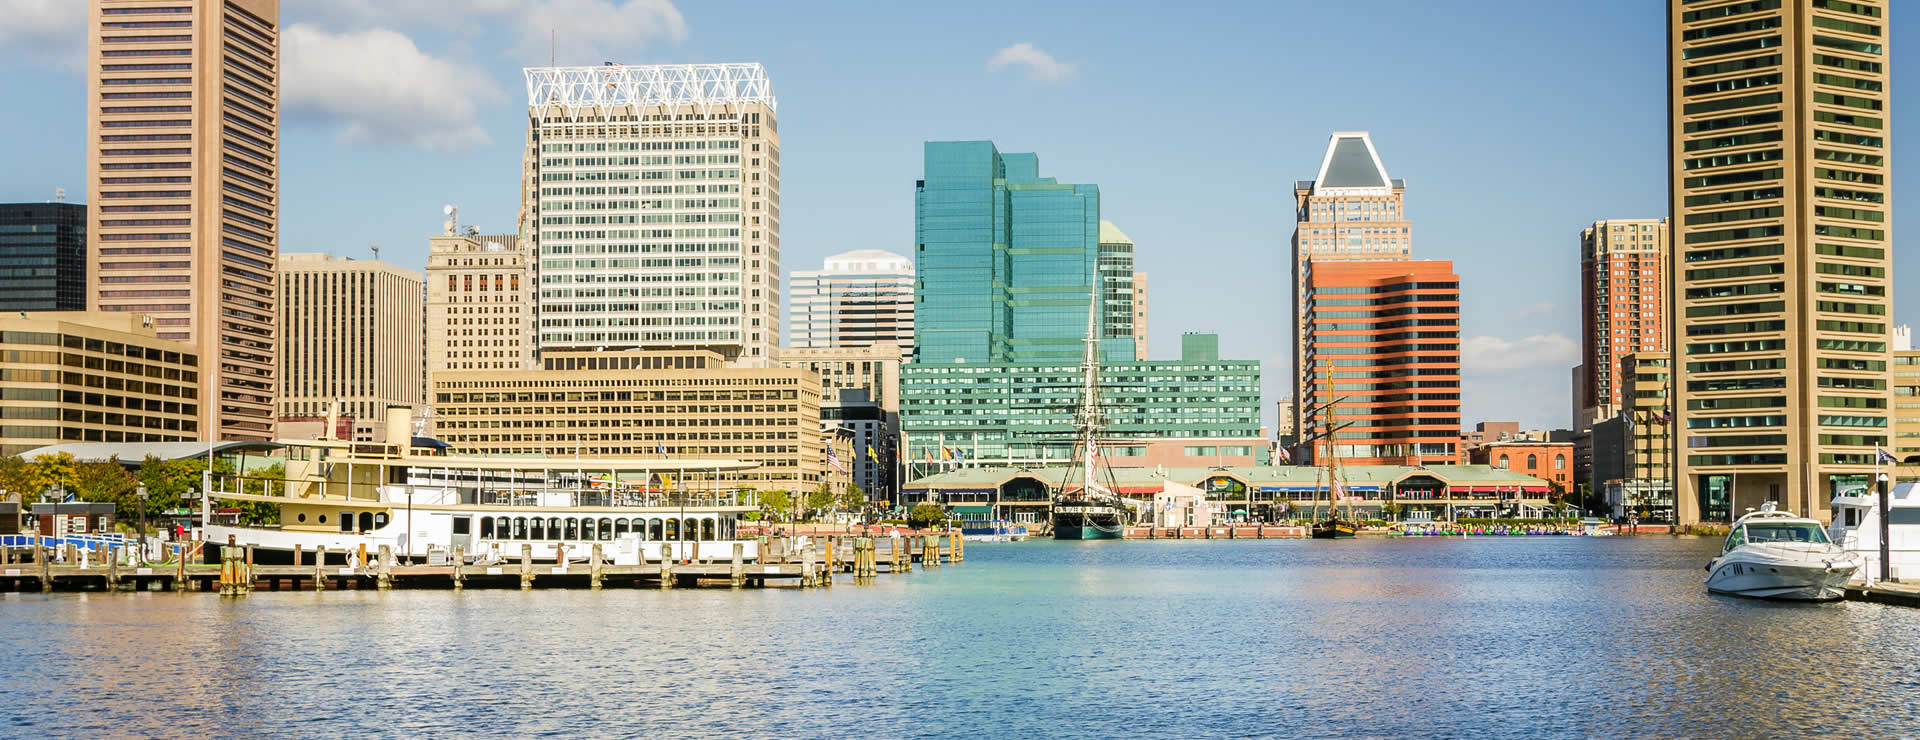 Downtown Baltimore and waterfront